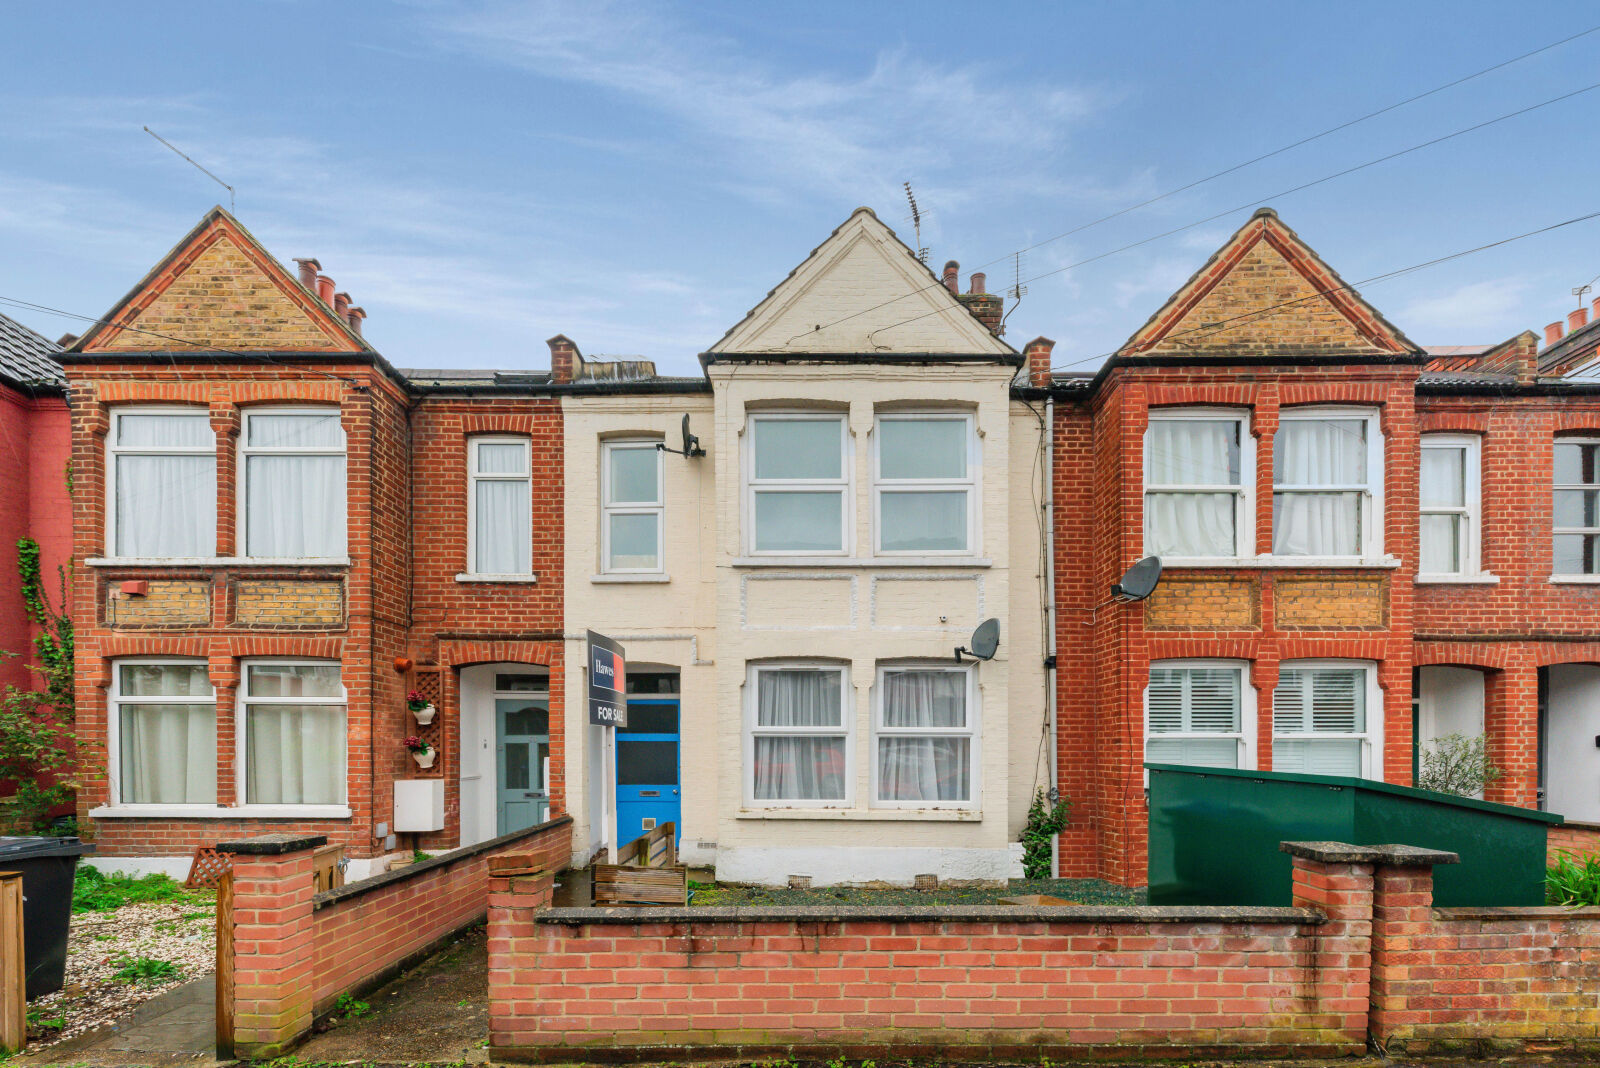 2 bedroom  flat for sale Oxford Avenue, Wimbledon Chase, SW20, main image